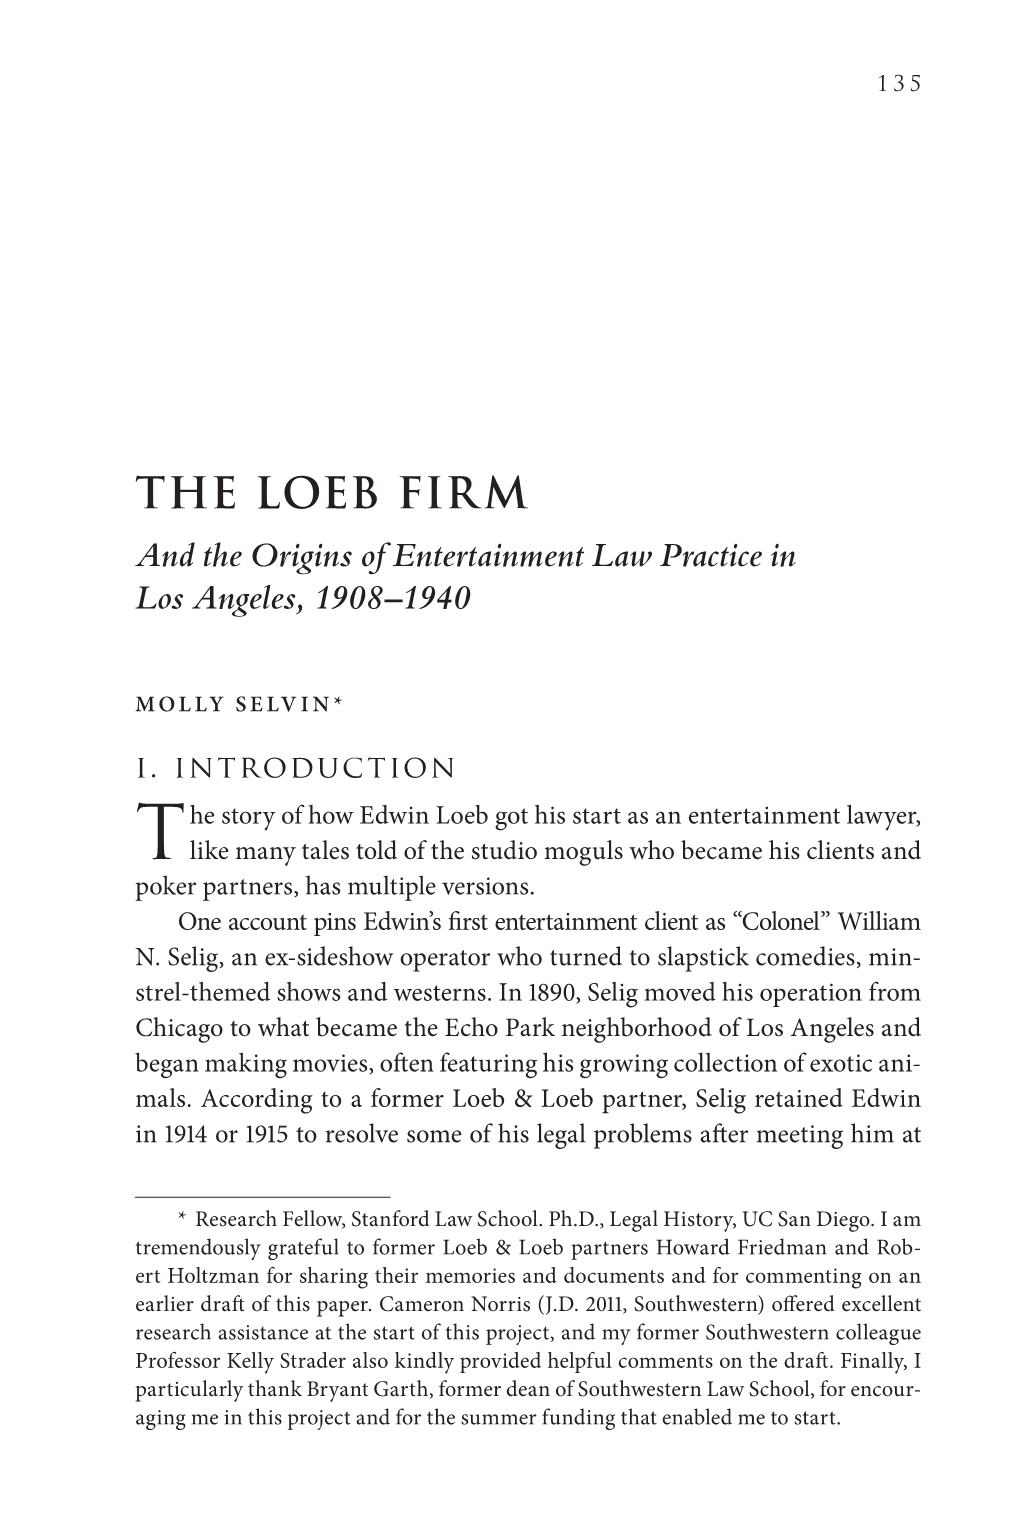 The Loeb Firm and the Origins of Entertainment Law Practice in Los